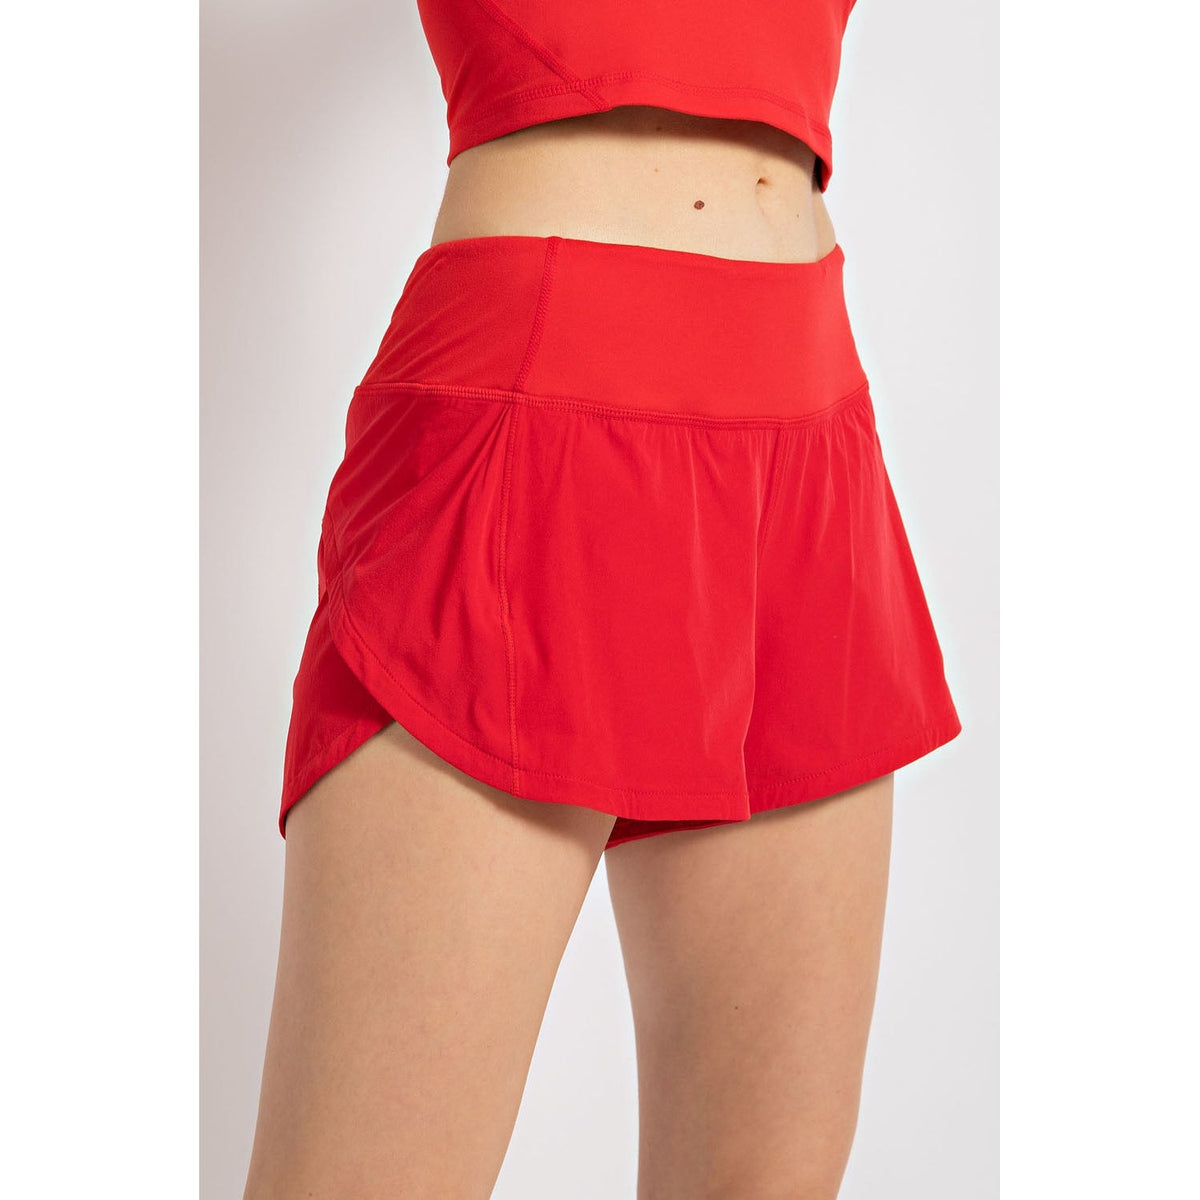 RED ATHLETIC WEAR – Body and Sol